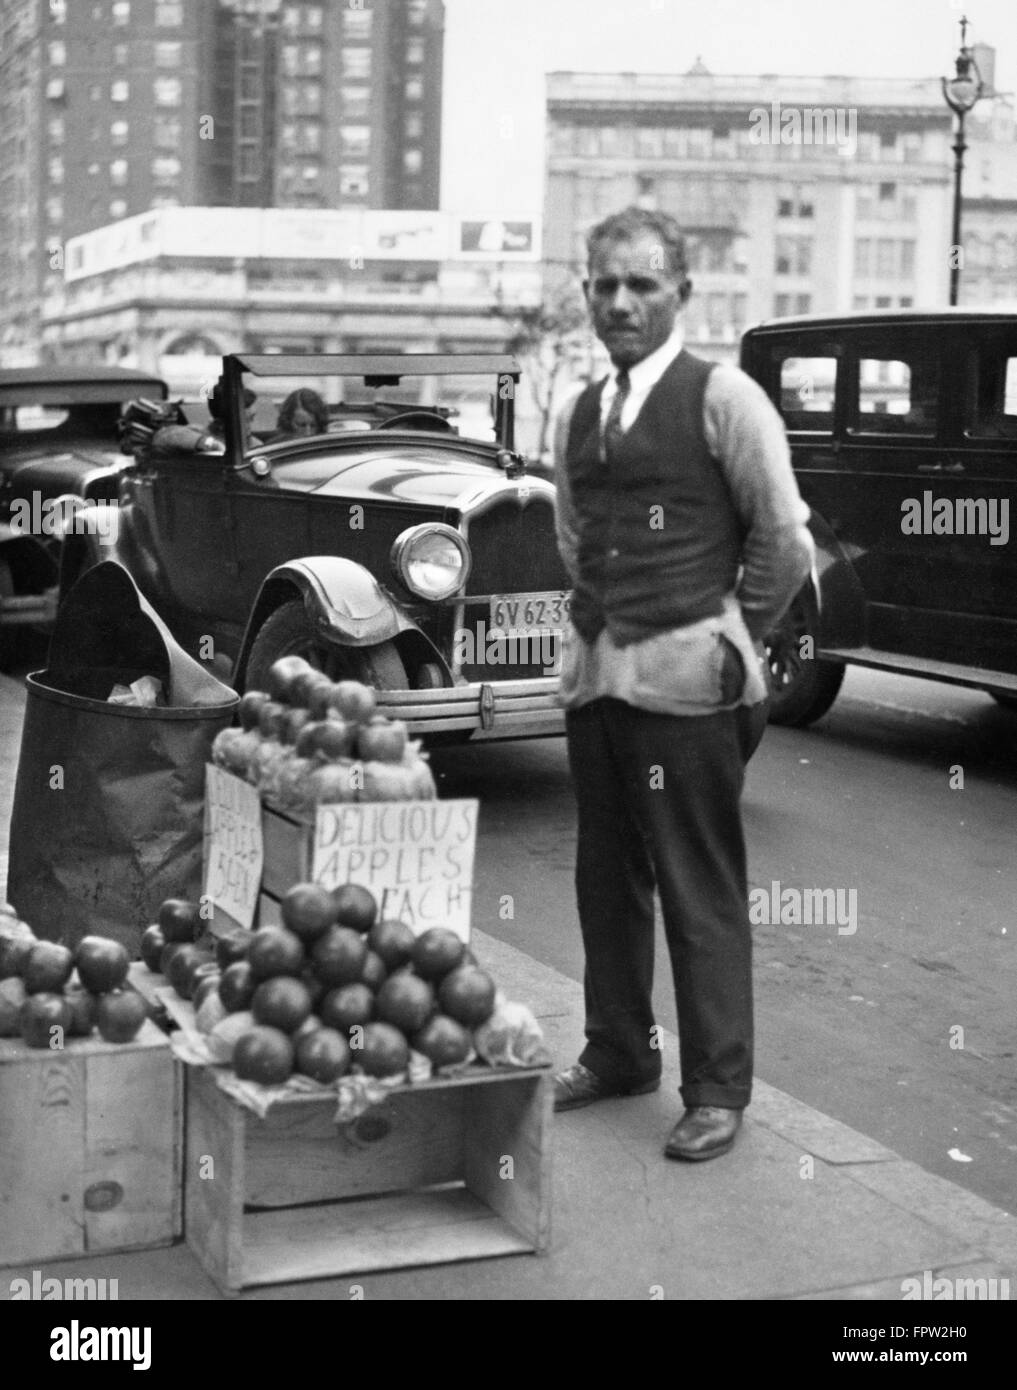 1930s SIDEWALK APPLE VENDOR MAN LOOKING AT CAMERA DURING THE GREAT DEPRESSION Stock Photo